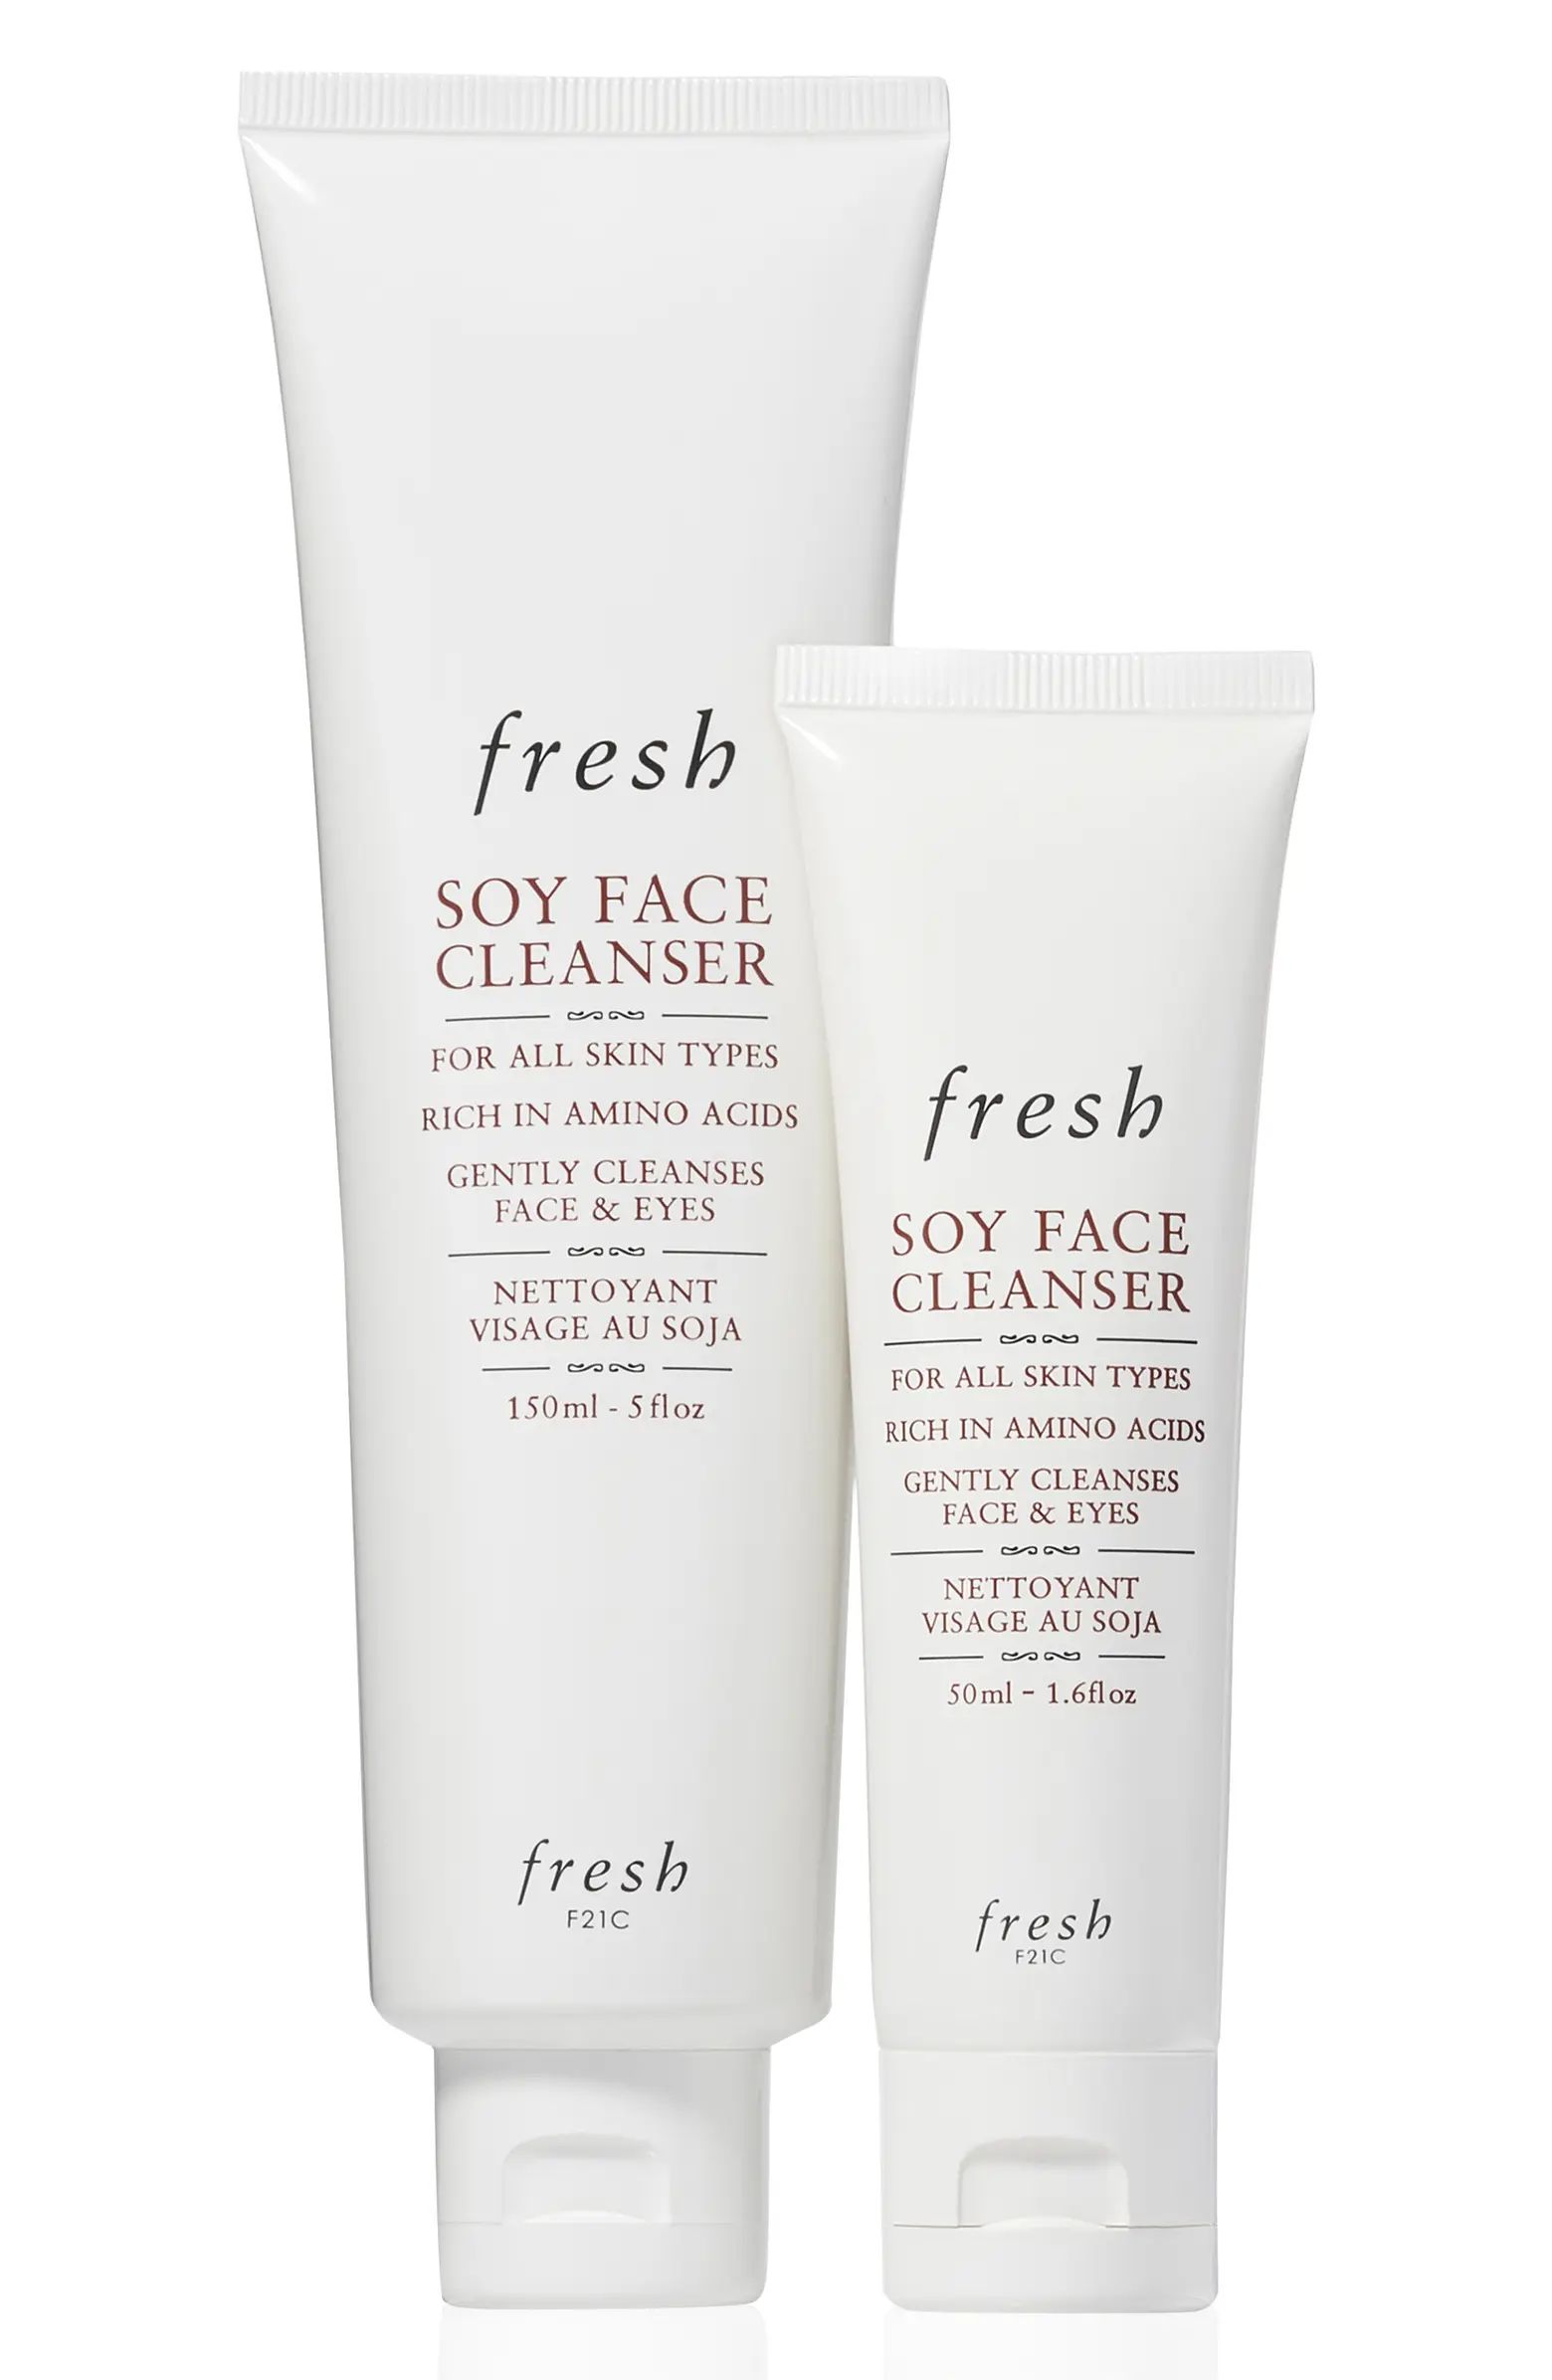 Soy Face Cleanser Home & Away Set | Nordstrom